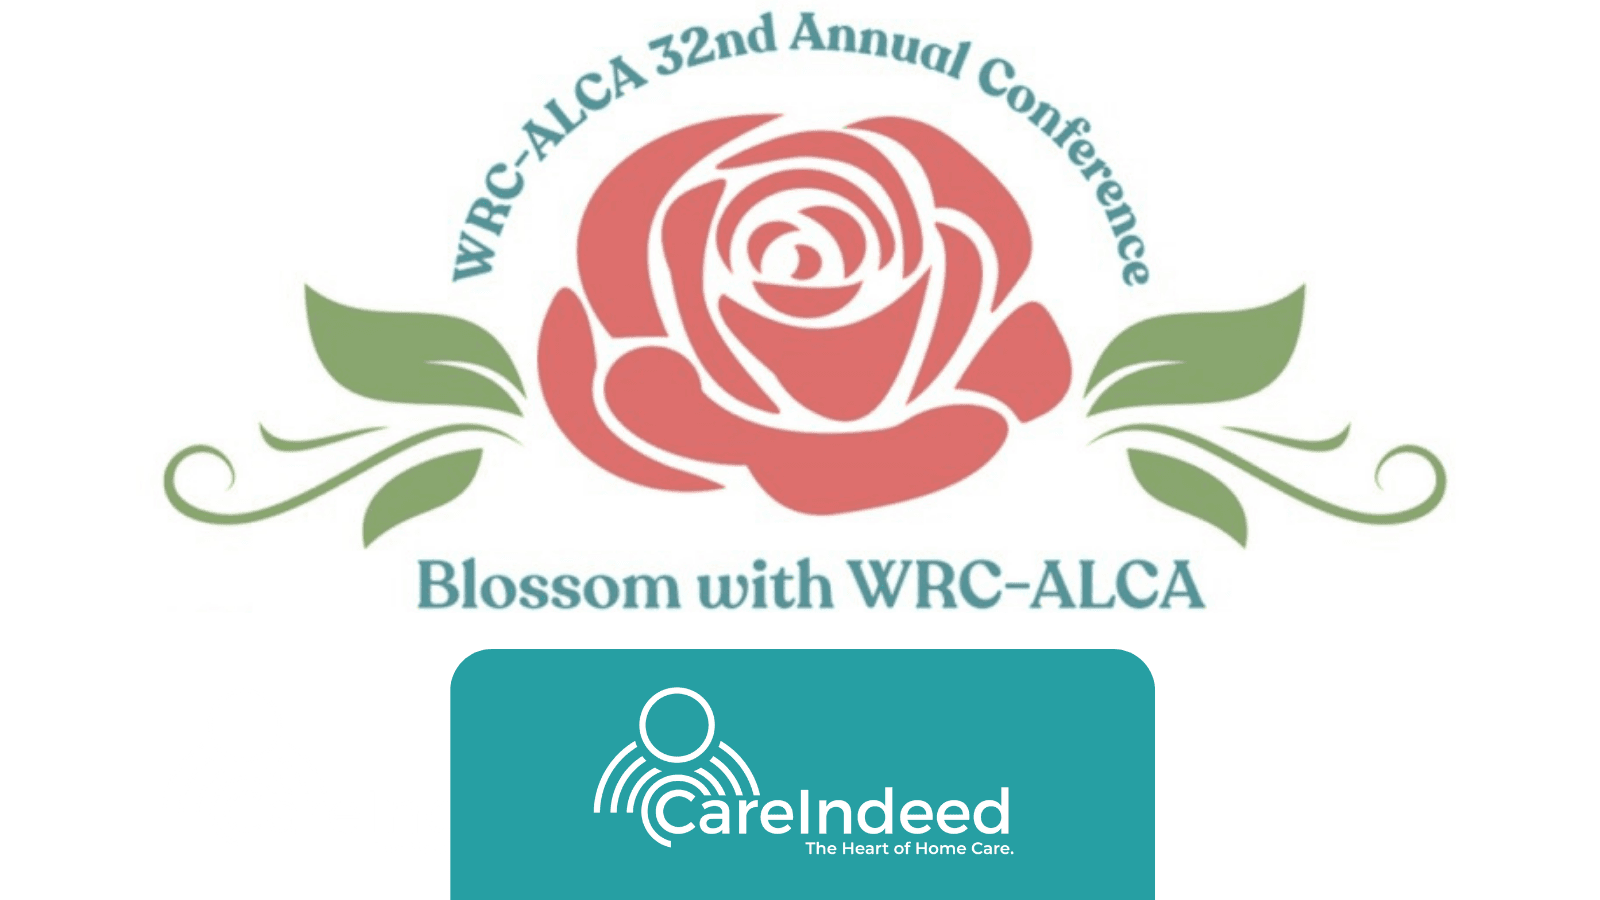 Western Region Chapter of the Aging Life Care Association 32nd Annual Conference